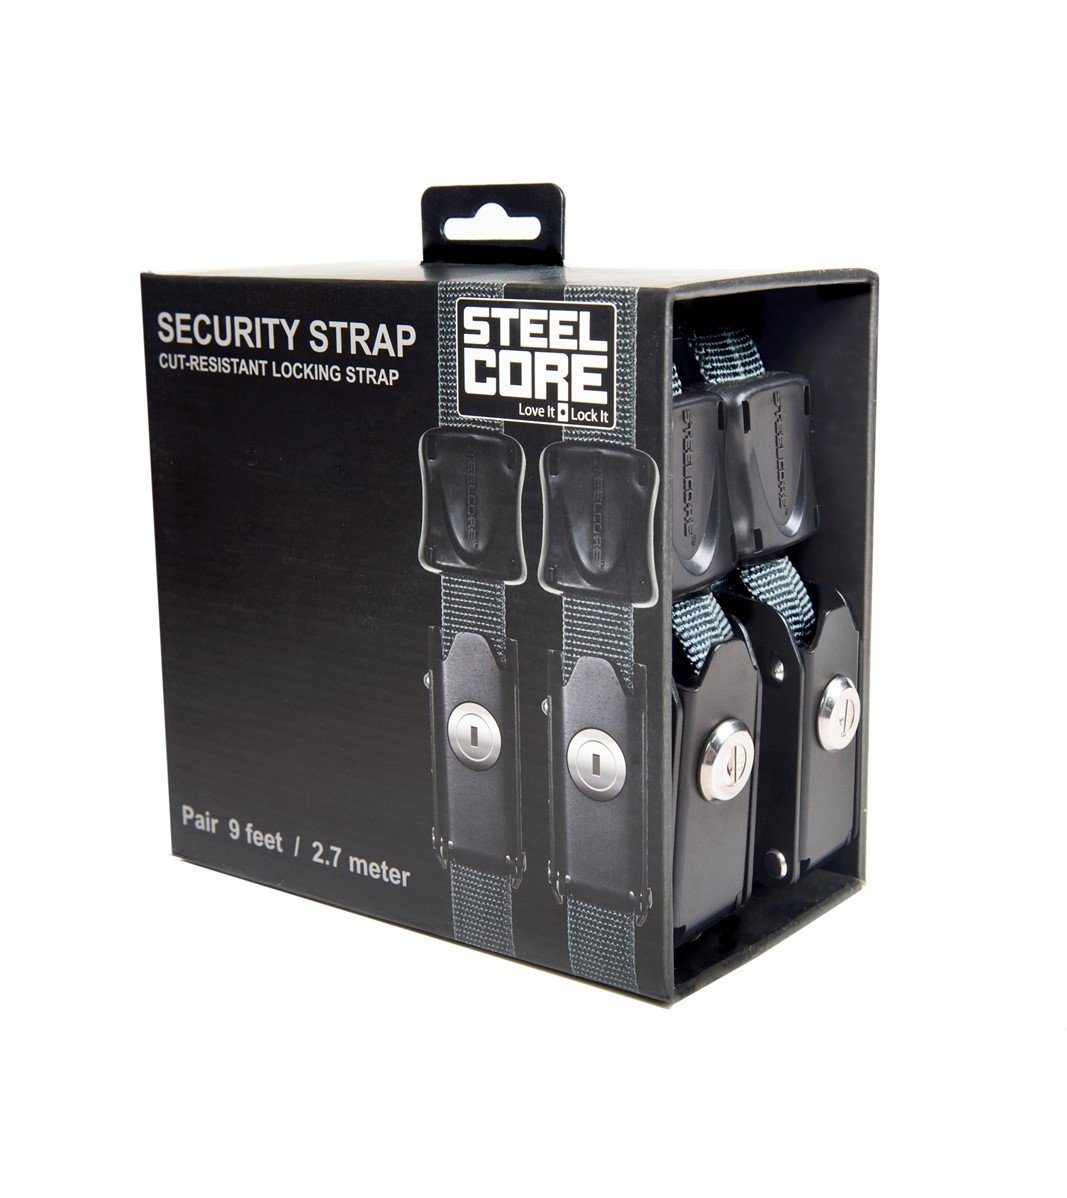 Steelcore Security Strap Pair, SSB-9-P, locking straps, locks, security, steelcore, Accessories - Steelcore Theft Resistant Locking Security Straps are ideal for securing your assets including bikes, motorcycles, surfboards, coolers, sporting goods, tools, and more. - Imported and distributed in North & South America by Lindeco Genuine Powersports.